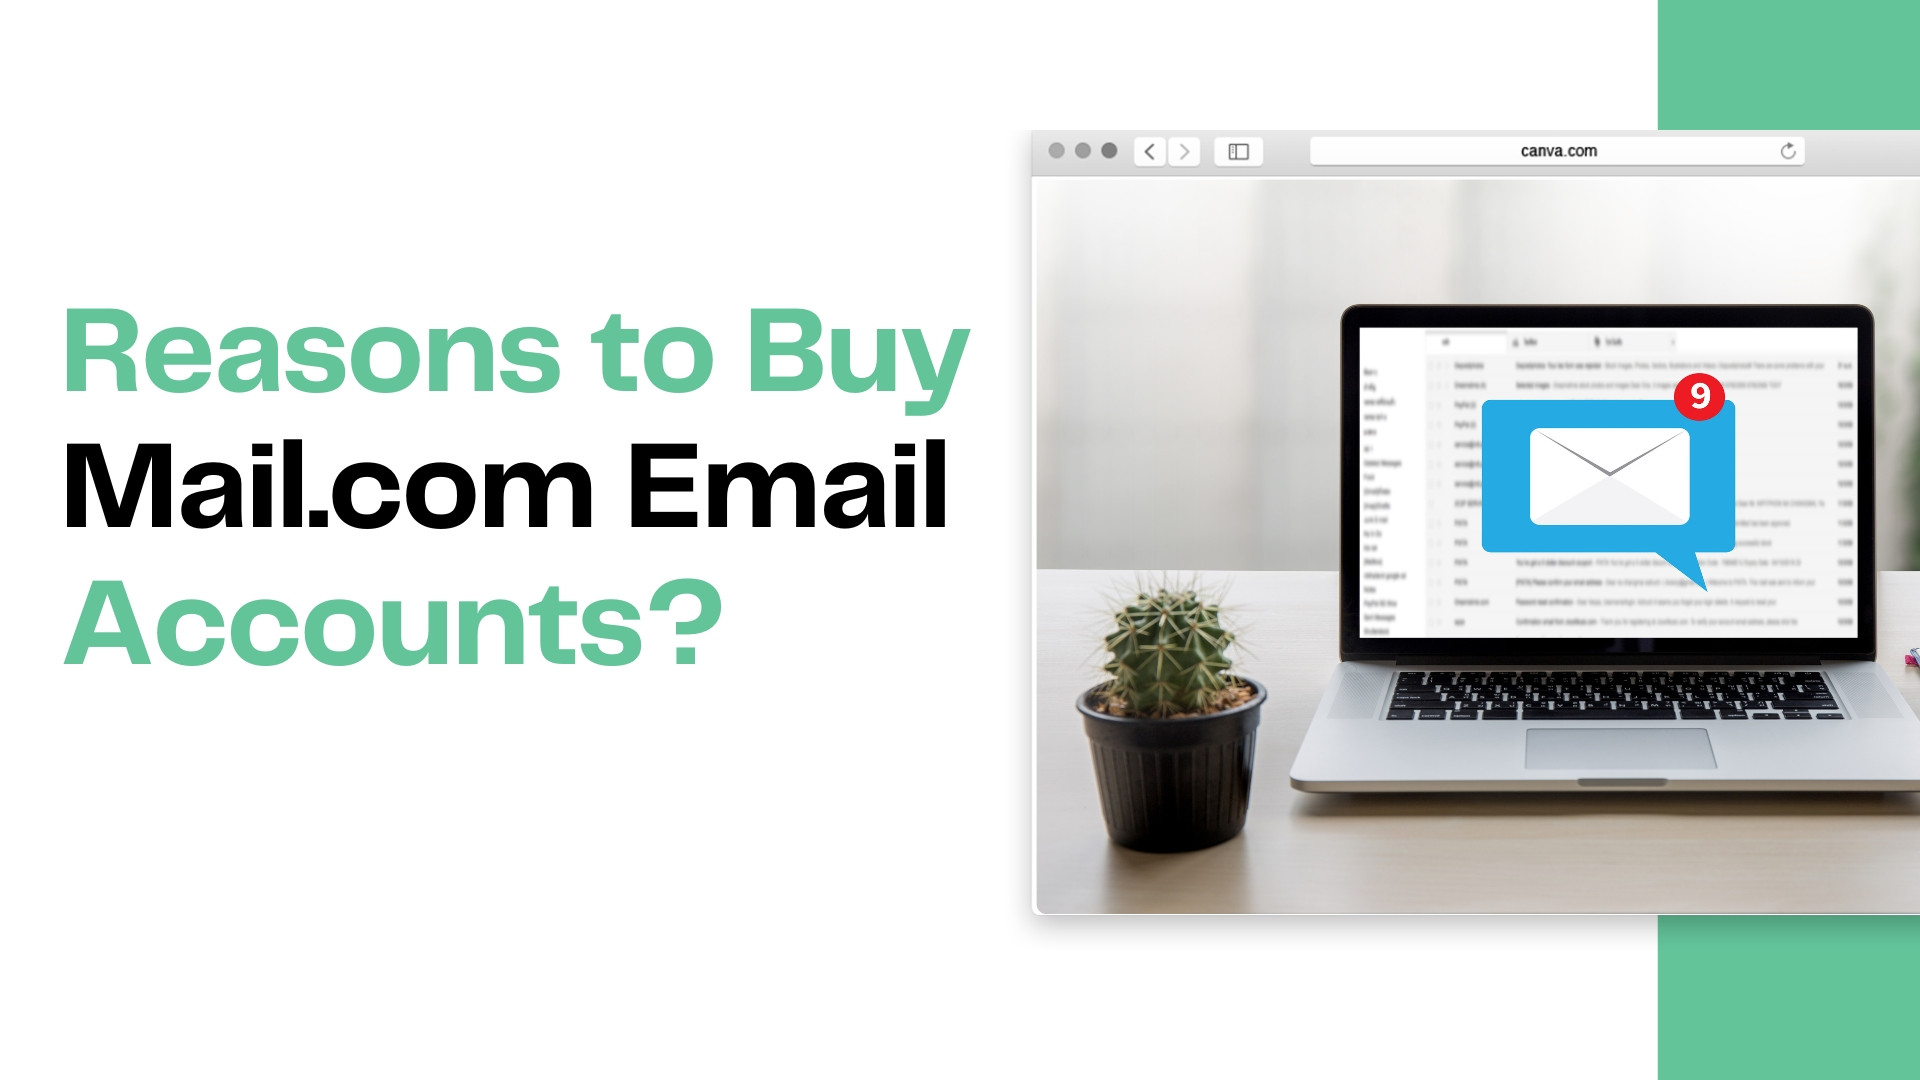 Reasons to buy Mail.com email accounts